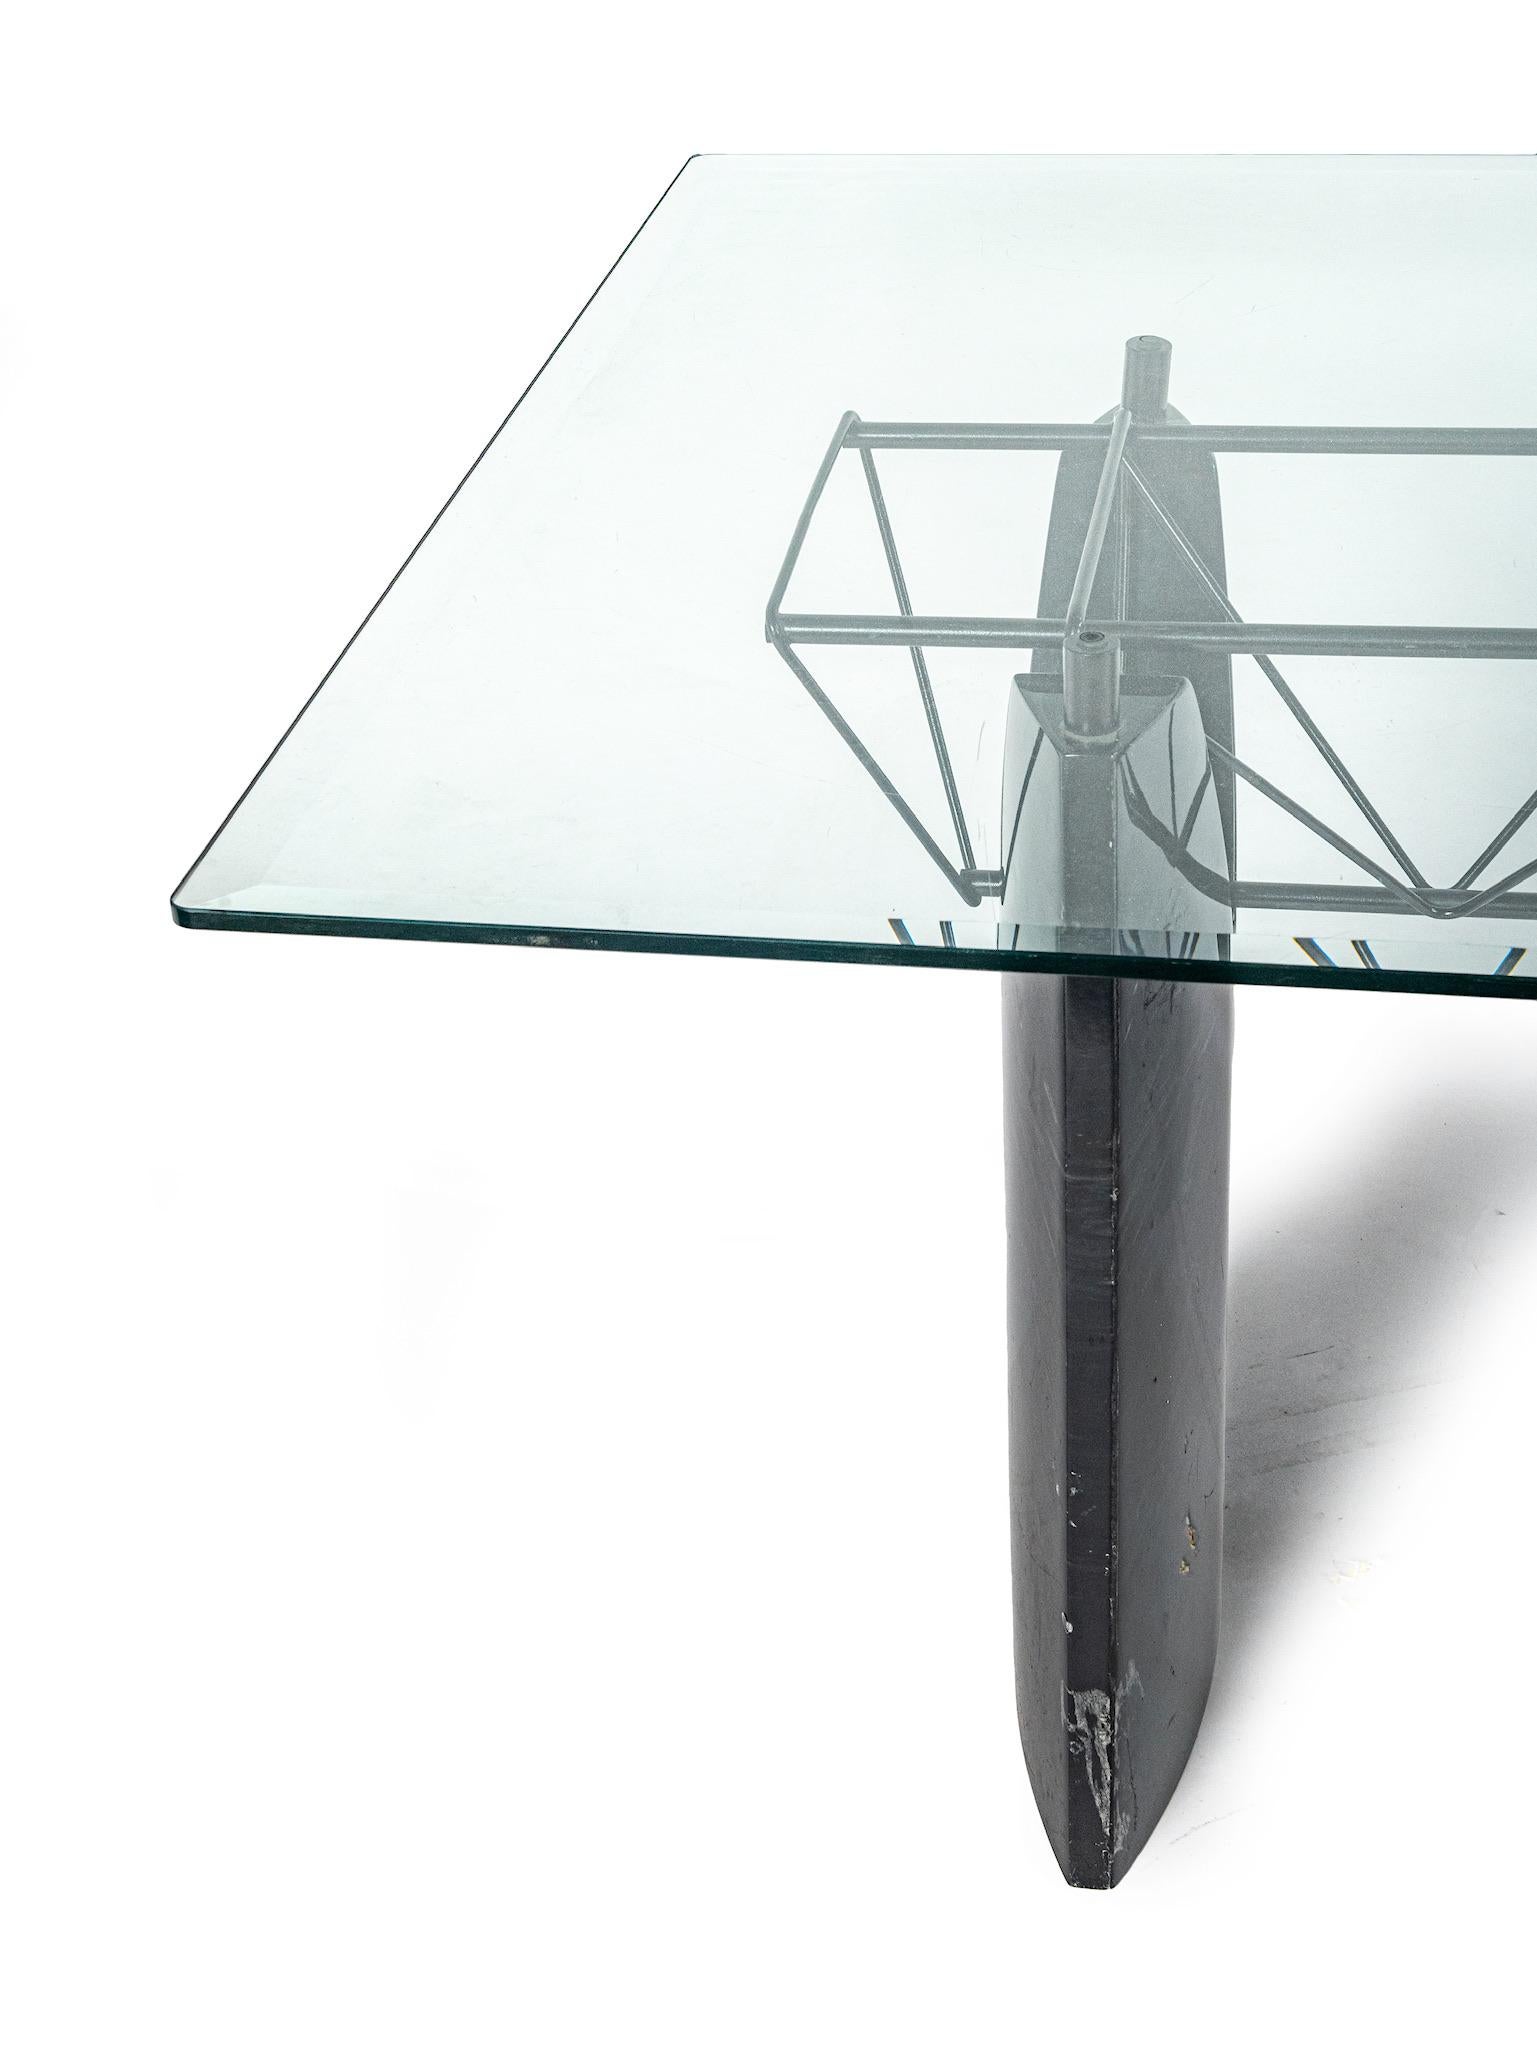 A modern rectangular dining table with black travertine base and glass top.